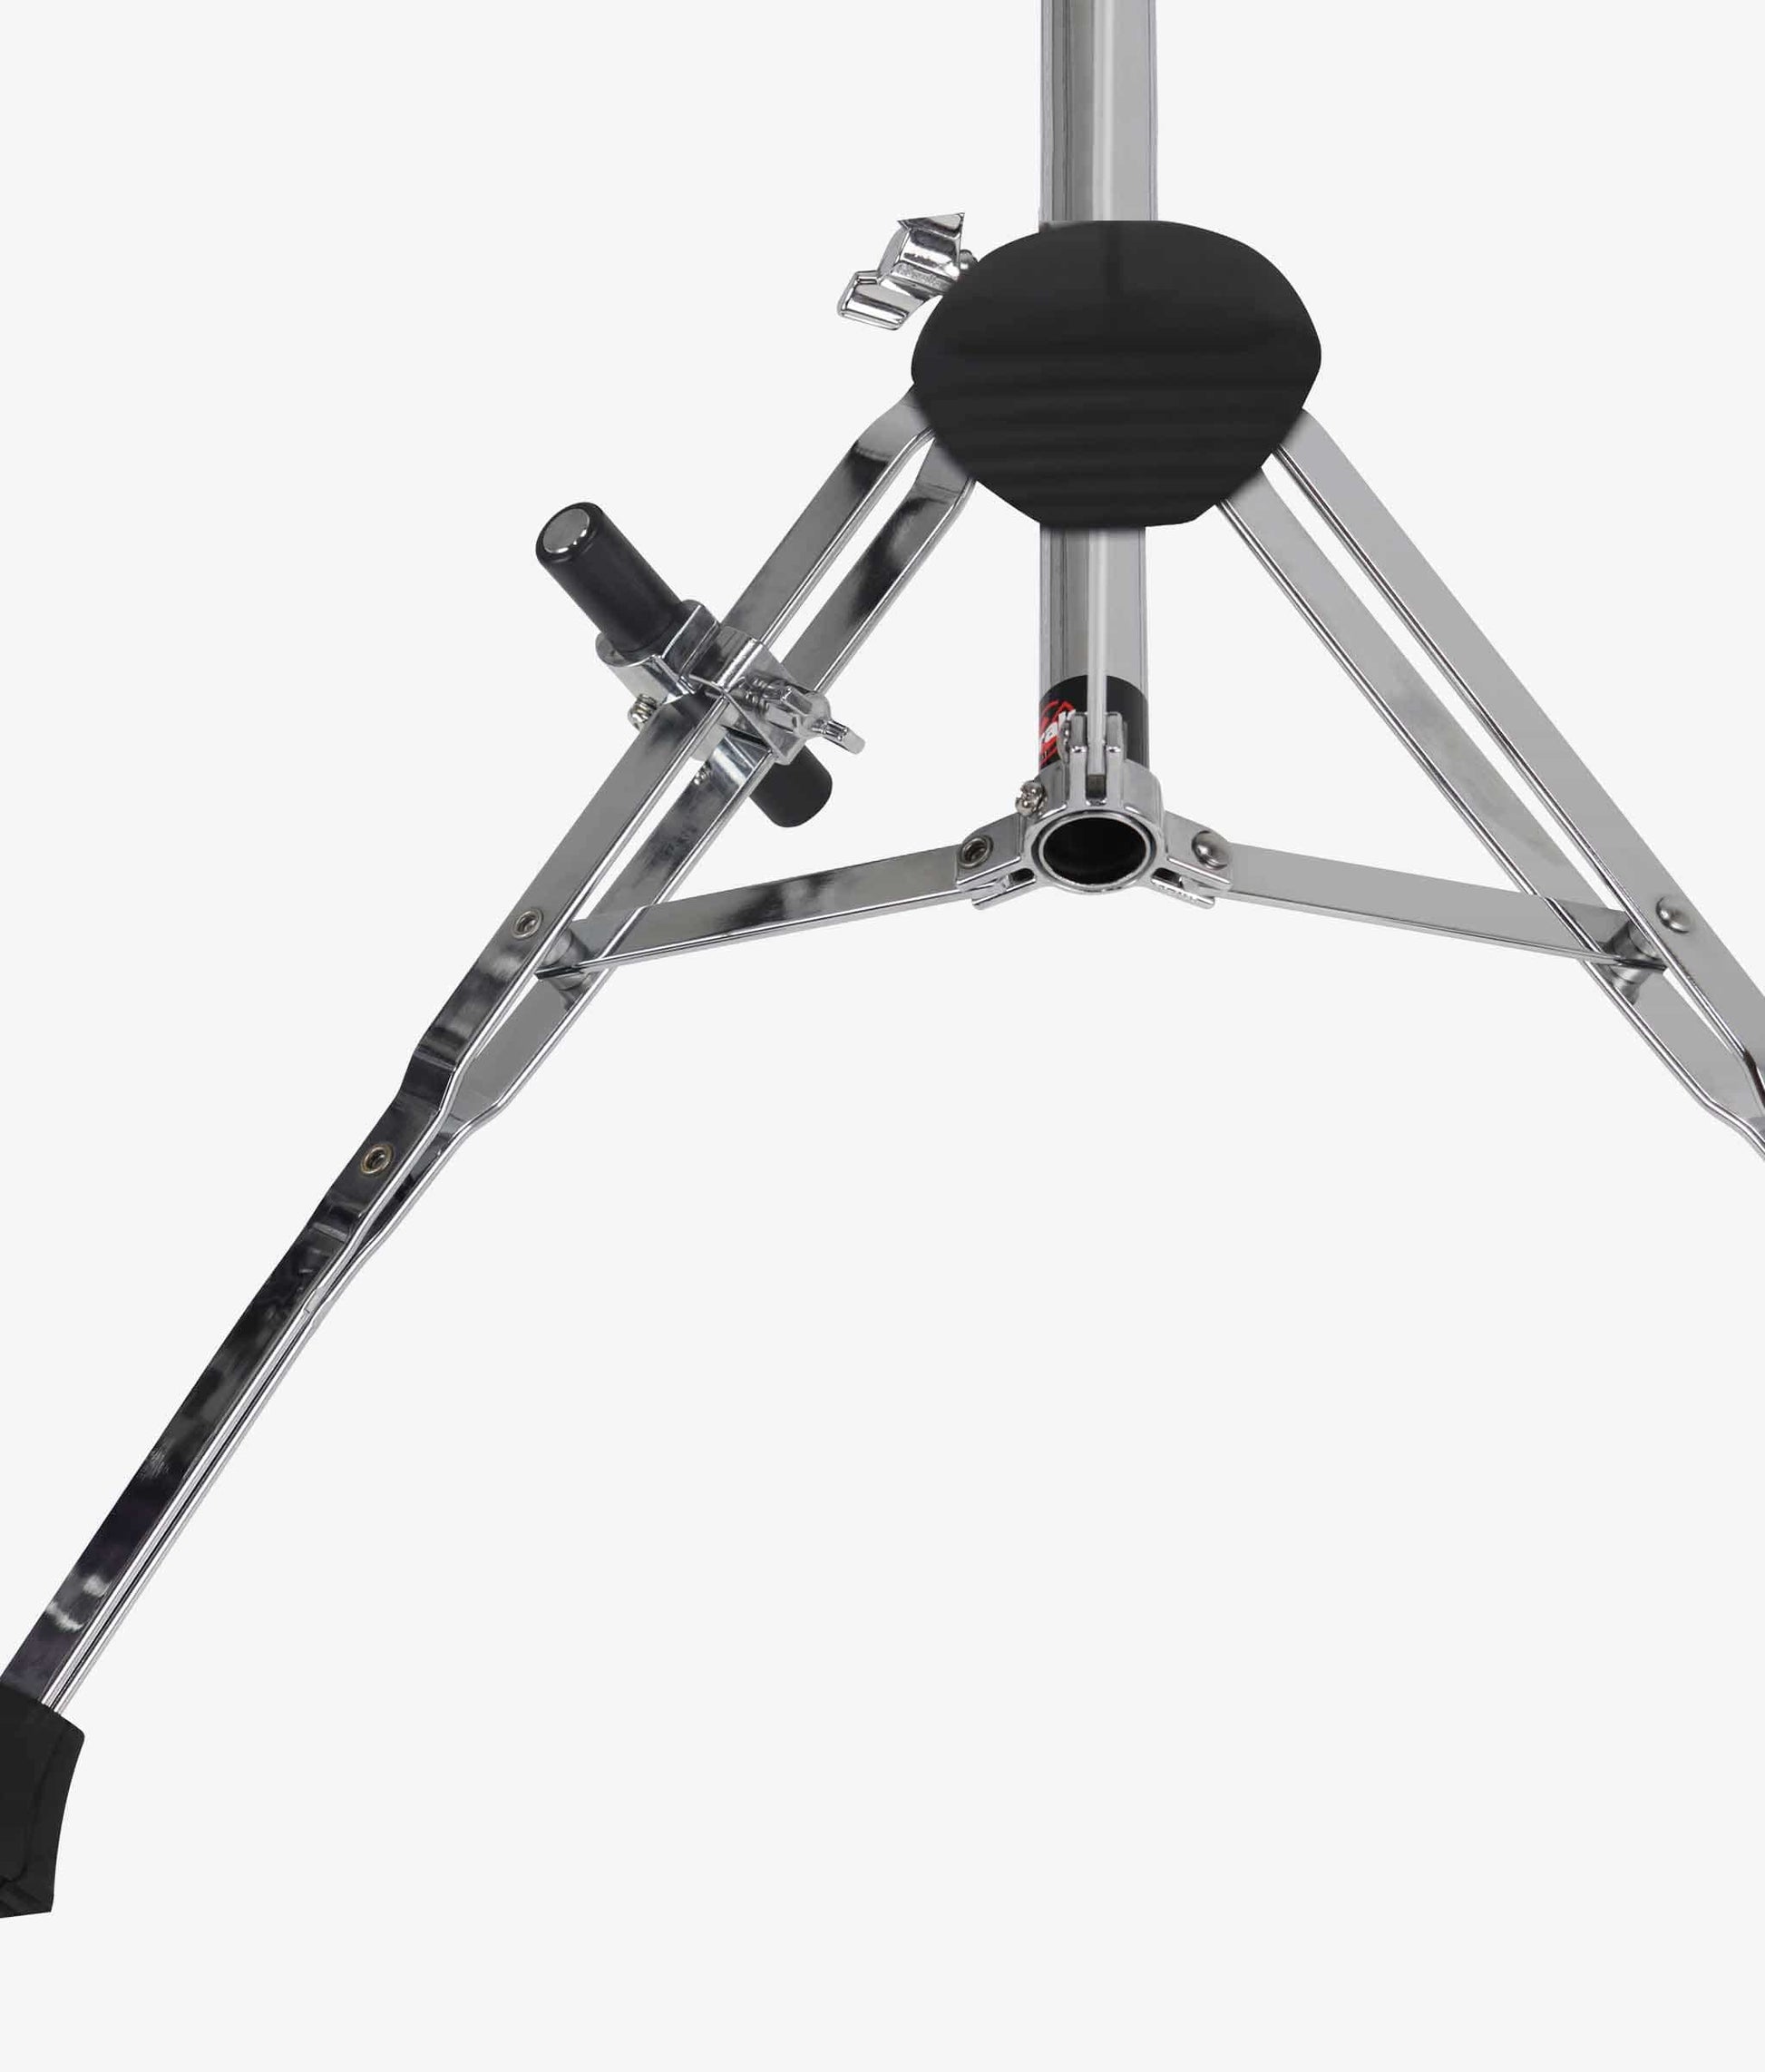 Gibraltar GGS10T 13" Compact Performance Stool with Footrest - Drum Throne | Gibraltar